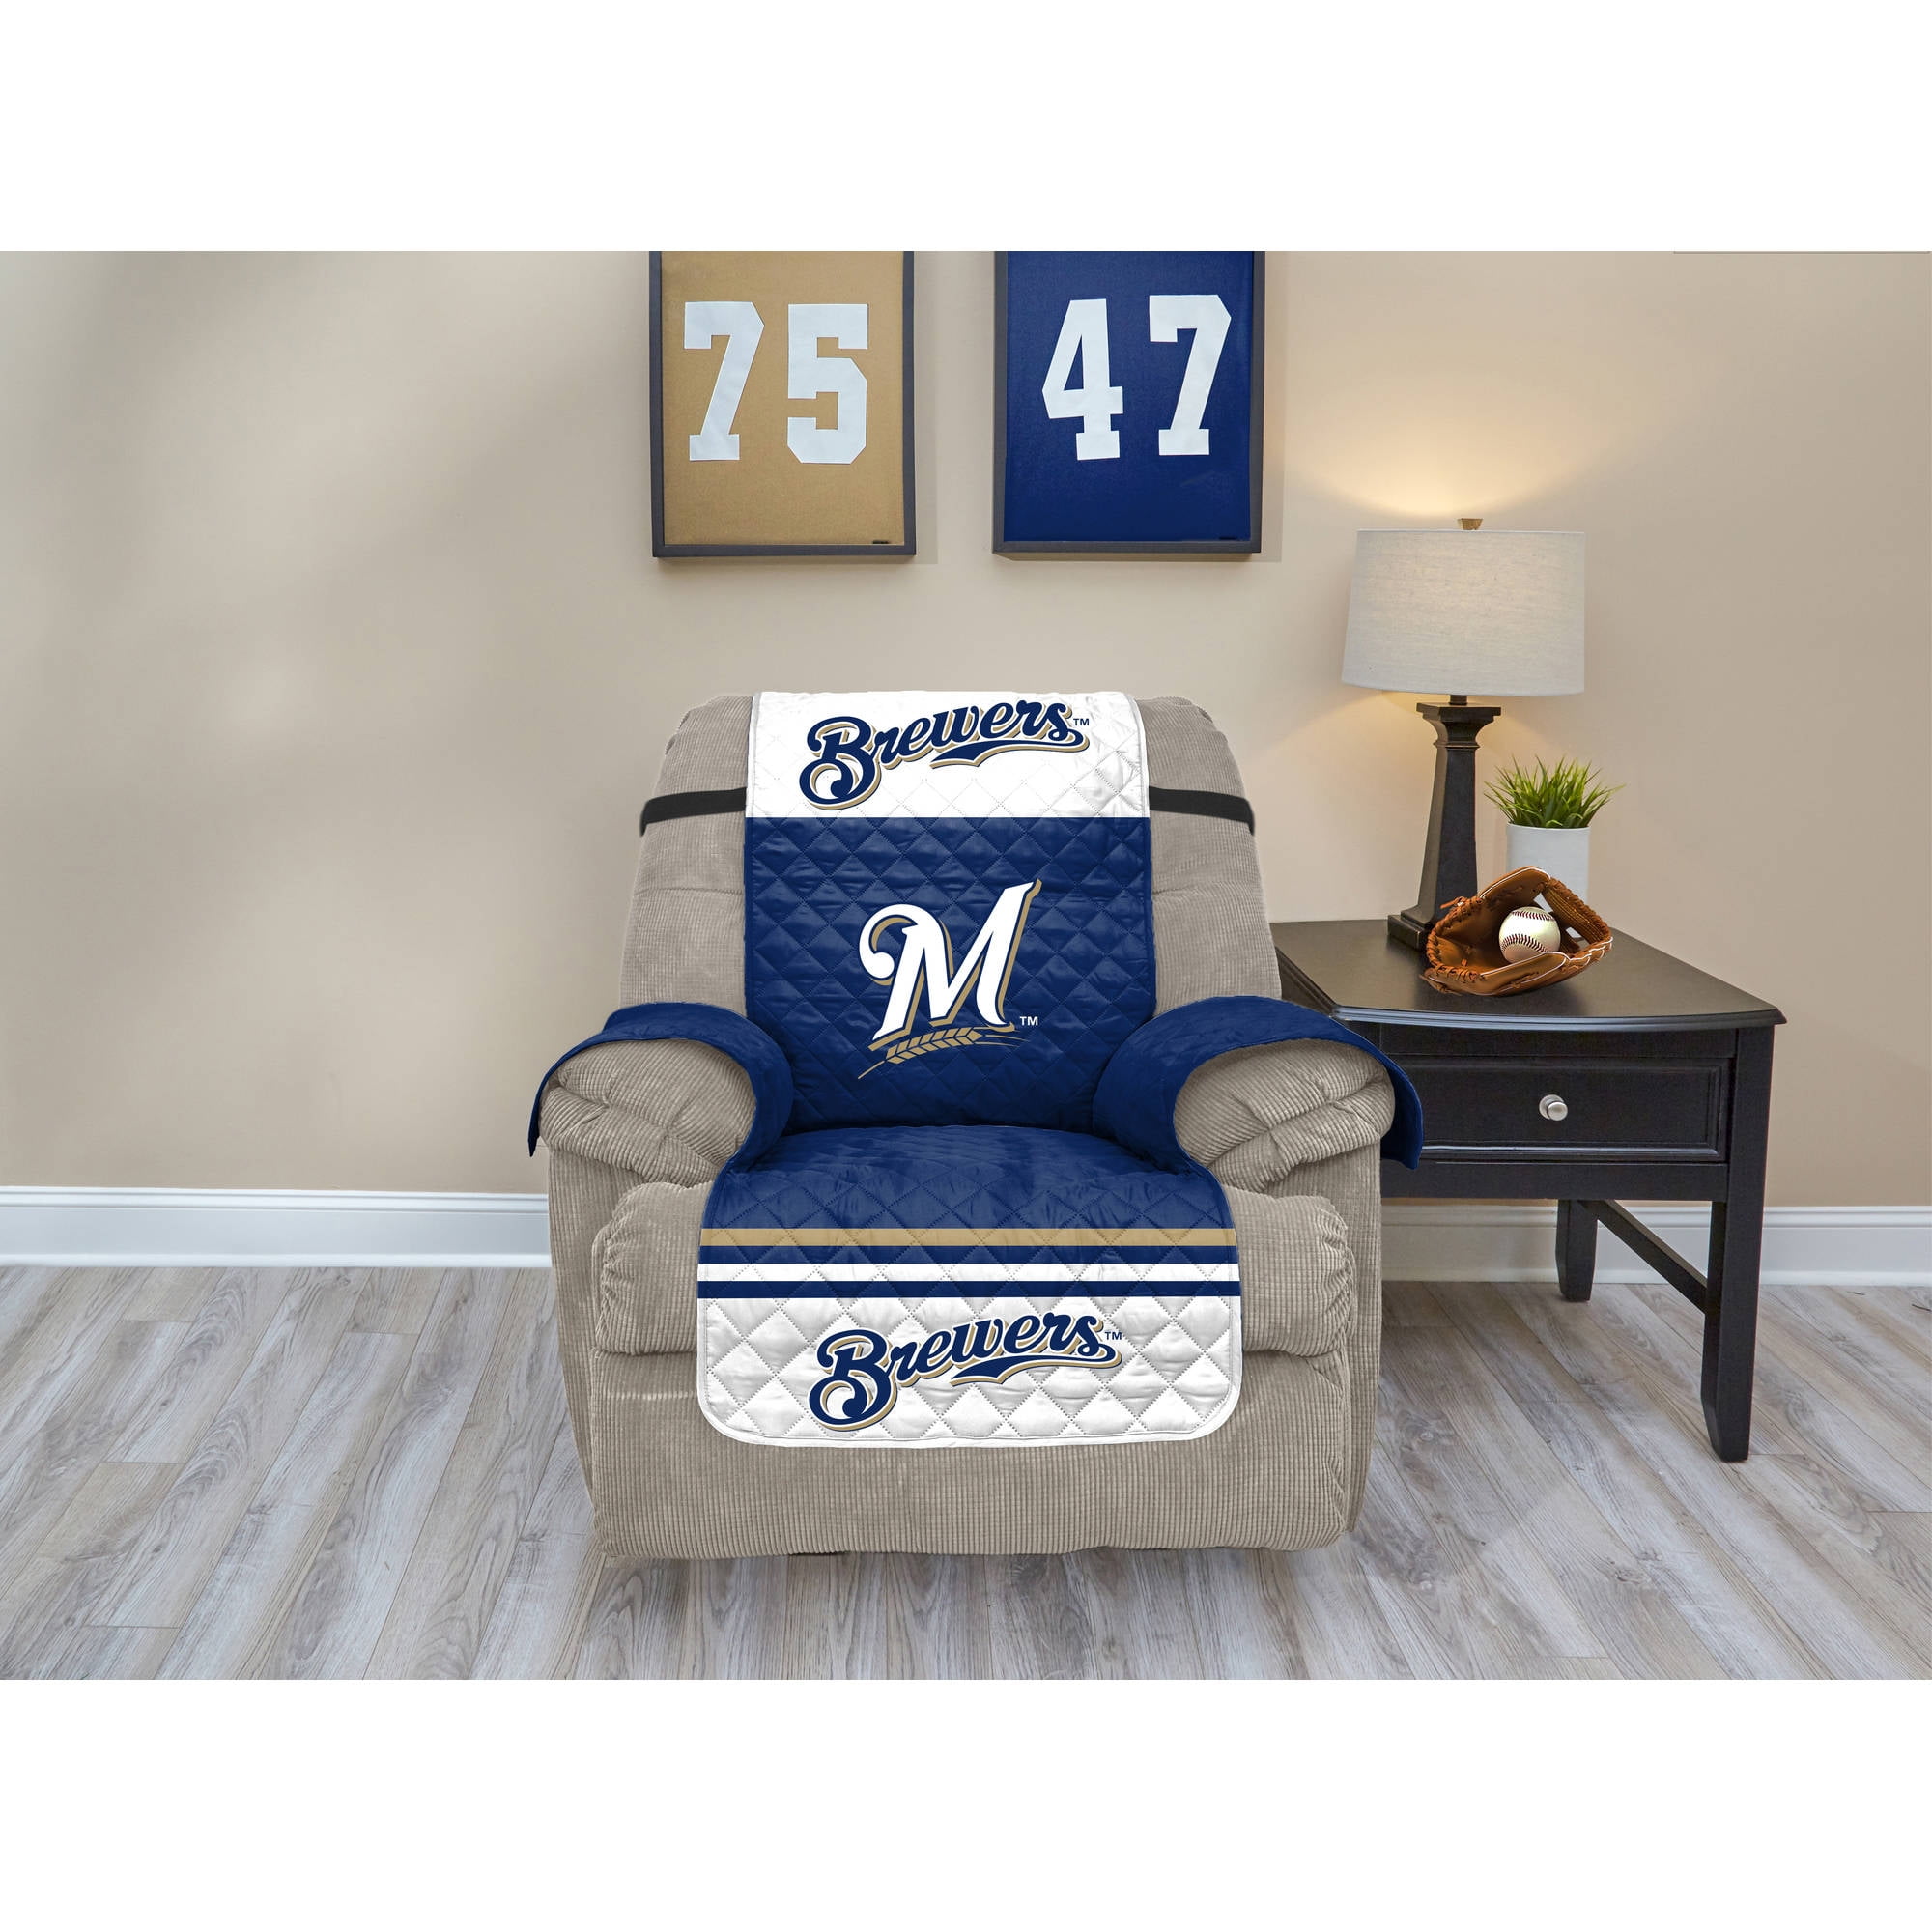 MILWAUKEE BREWERS BASEBALL TEAM OUTLET WALL PLATE SPORTS FAN MAN CAVE ROOM DECOR 